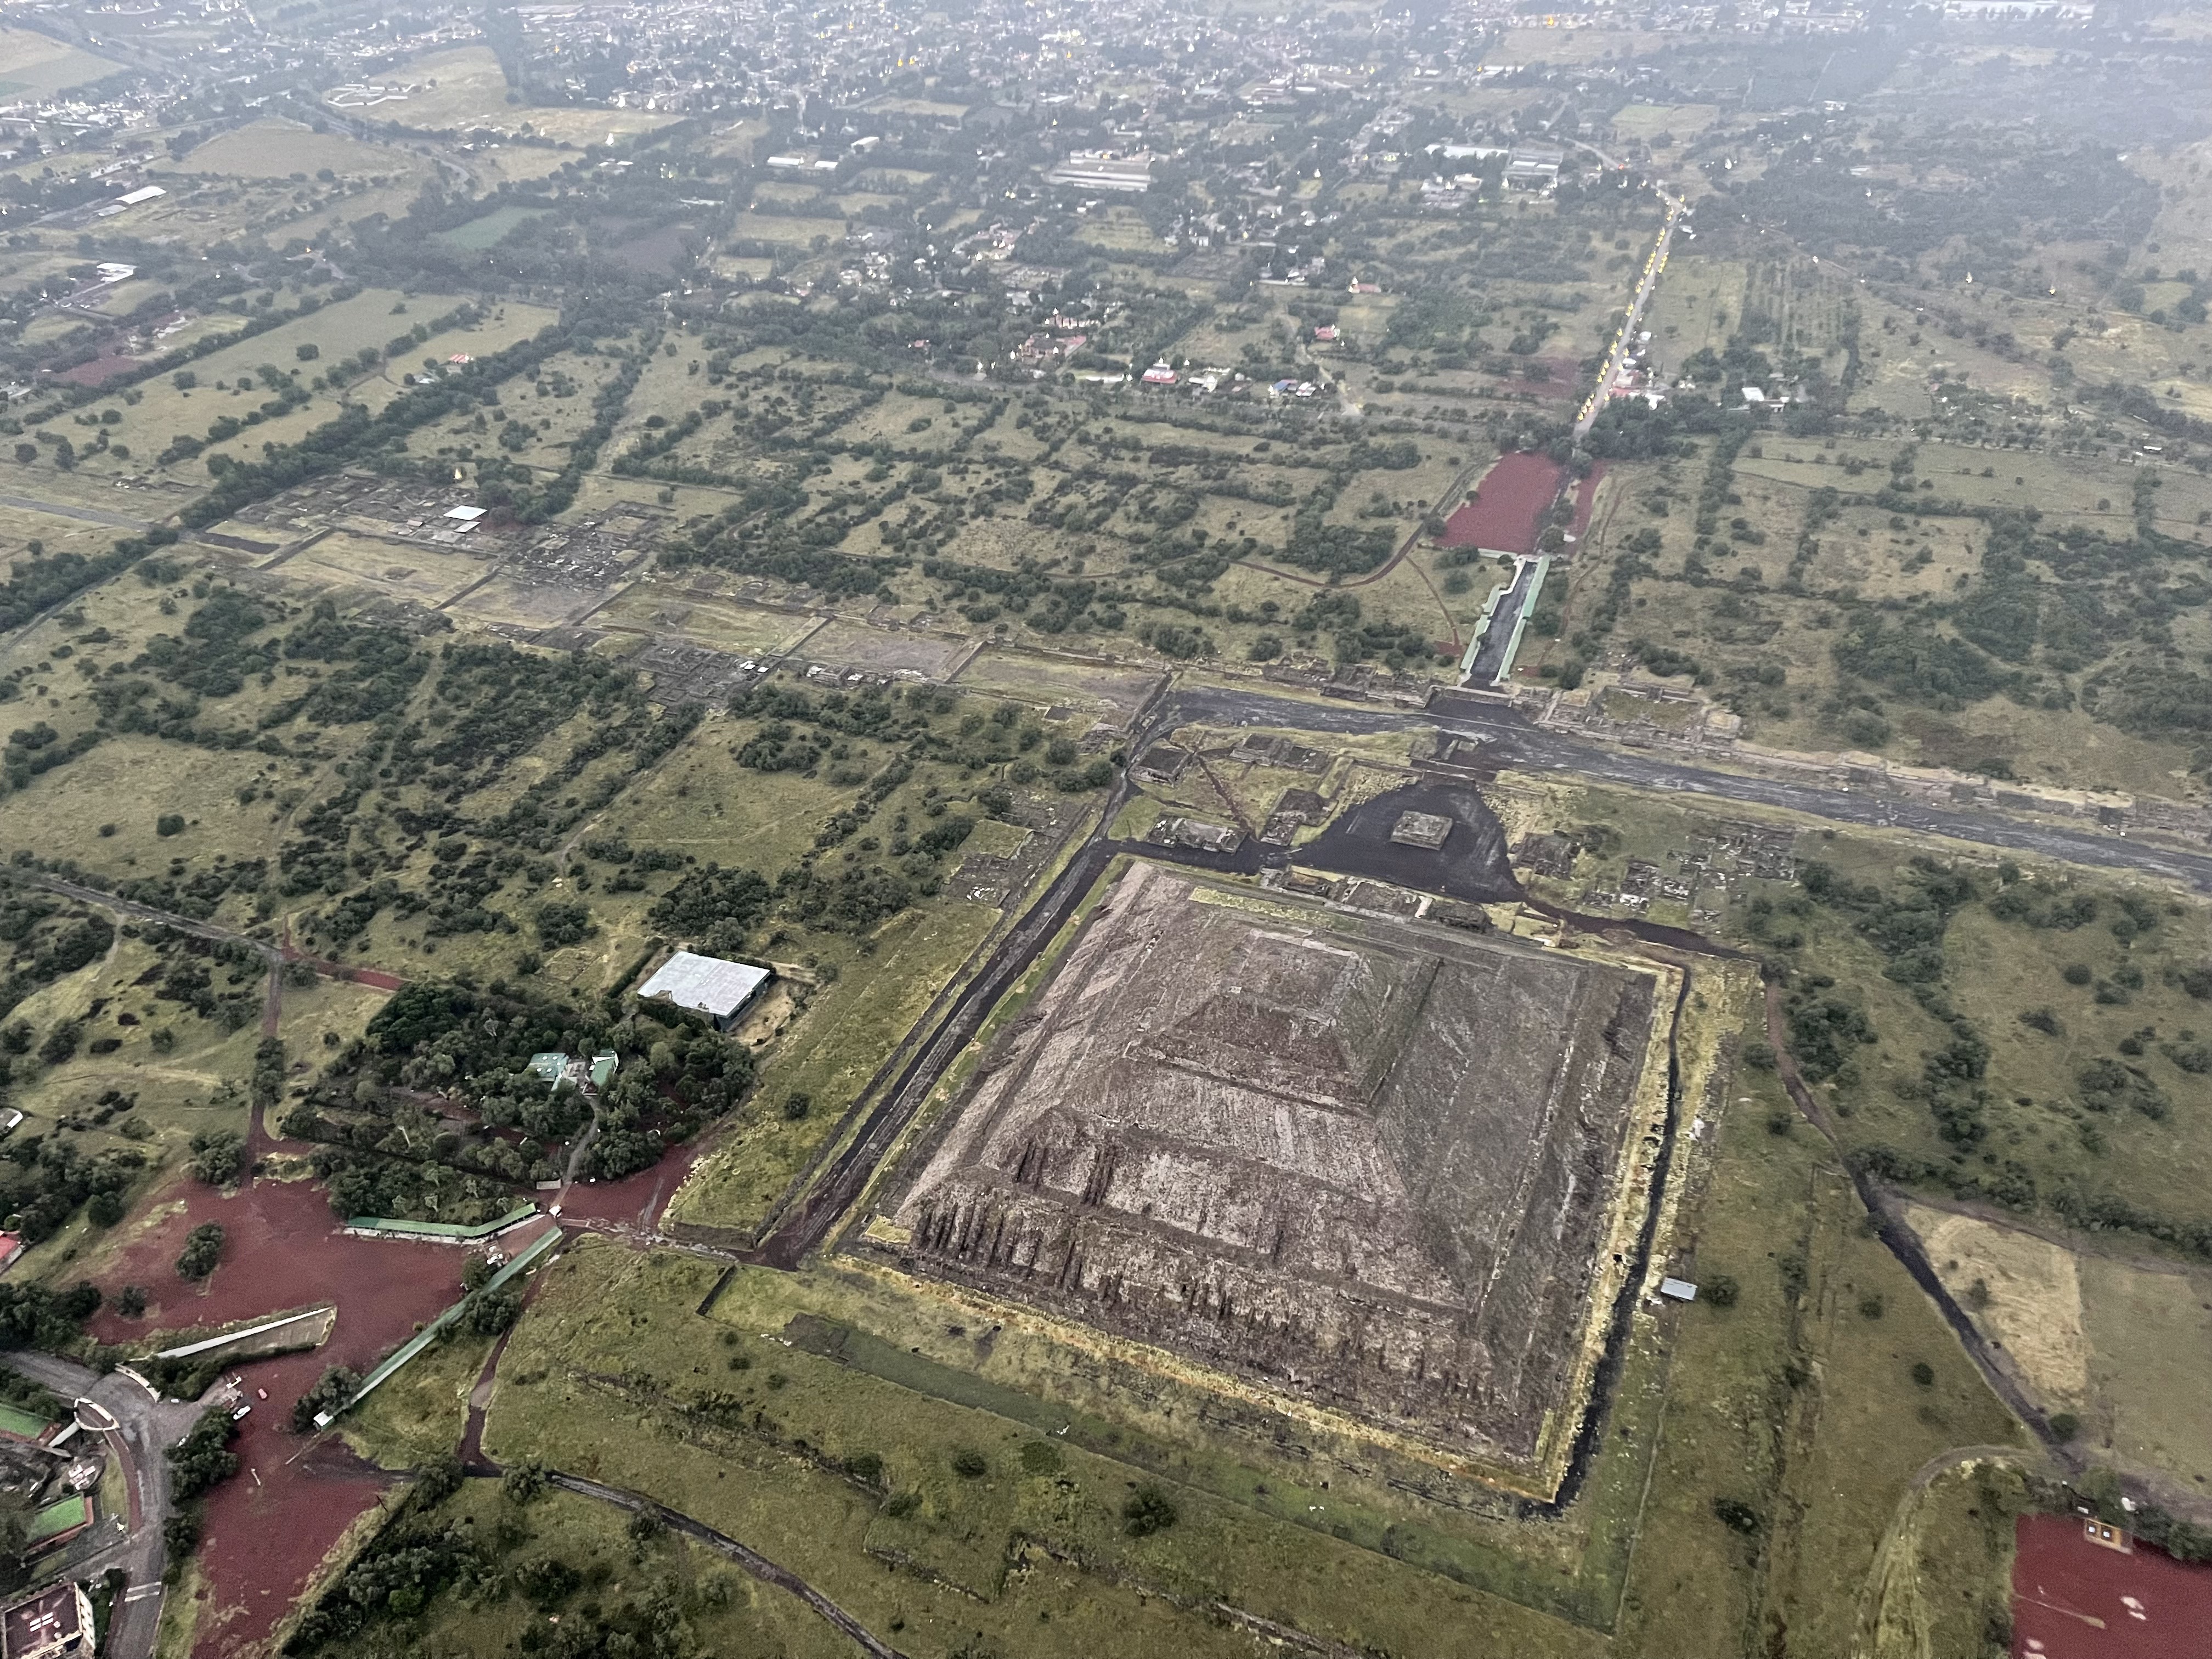 An aerial view of the Pyramid of the Sun and the Calzada de los Muertos